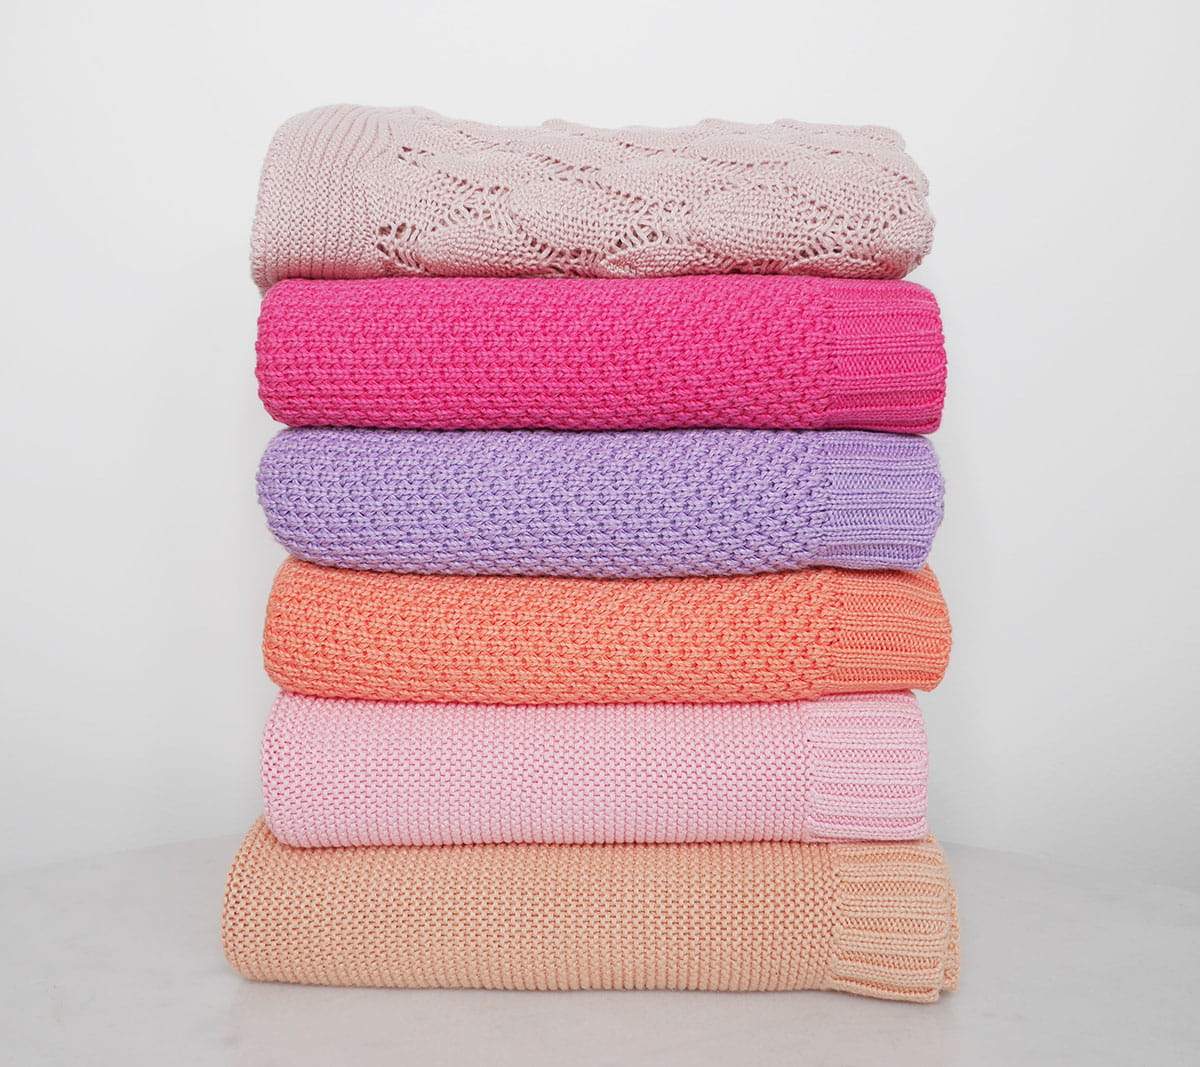 Bamboo baby blanket - Candy pink - Classic knit Blanket Lullalove UK 